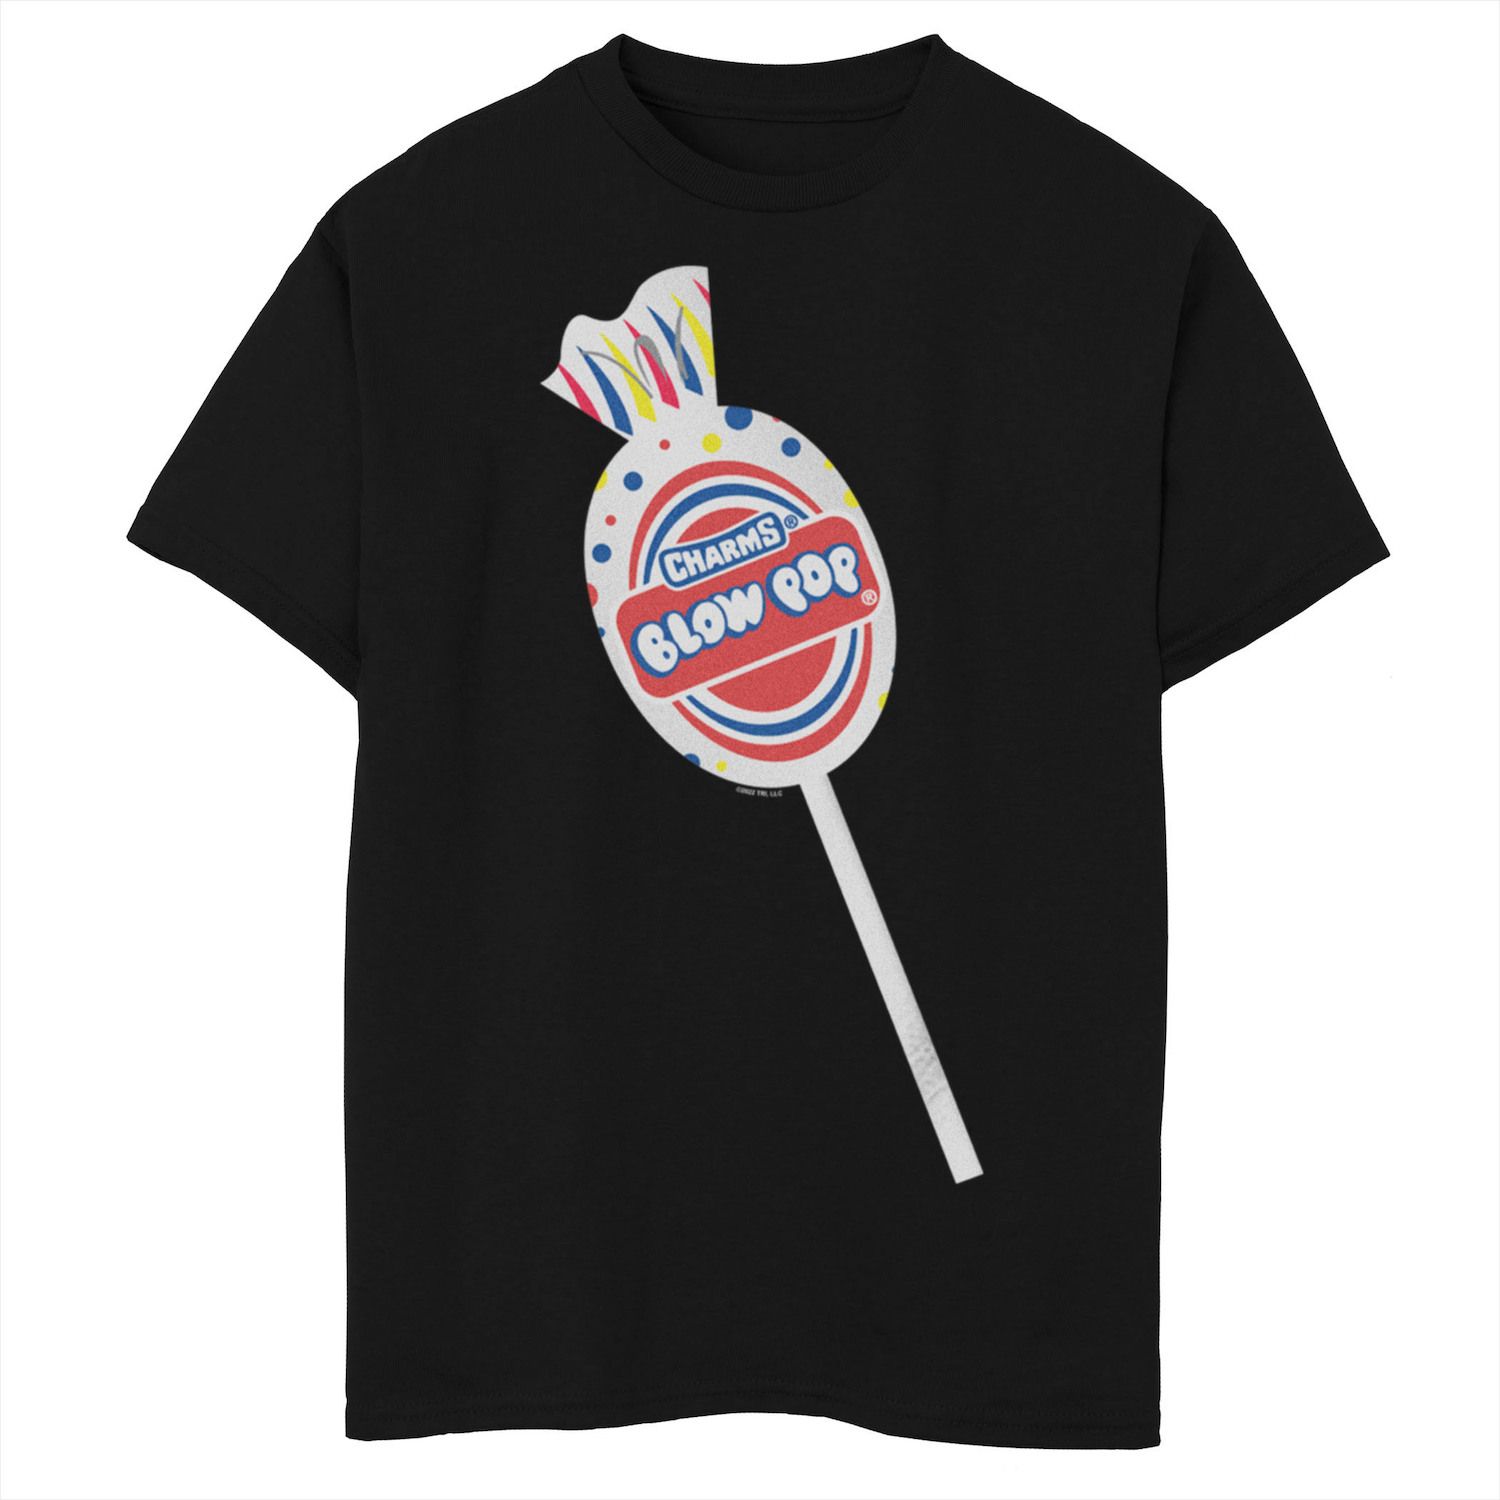 300 Pack Cake Pop Sticks 4 Inch Paper Treat Sticks for Lollipops, Candy  Apples, Suckers (White)